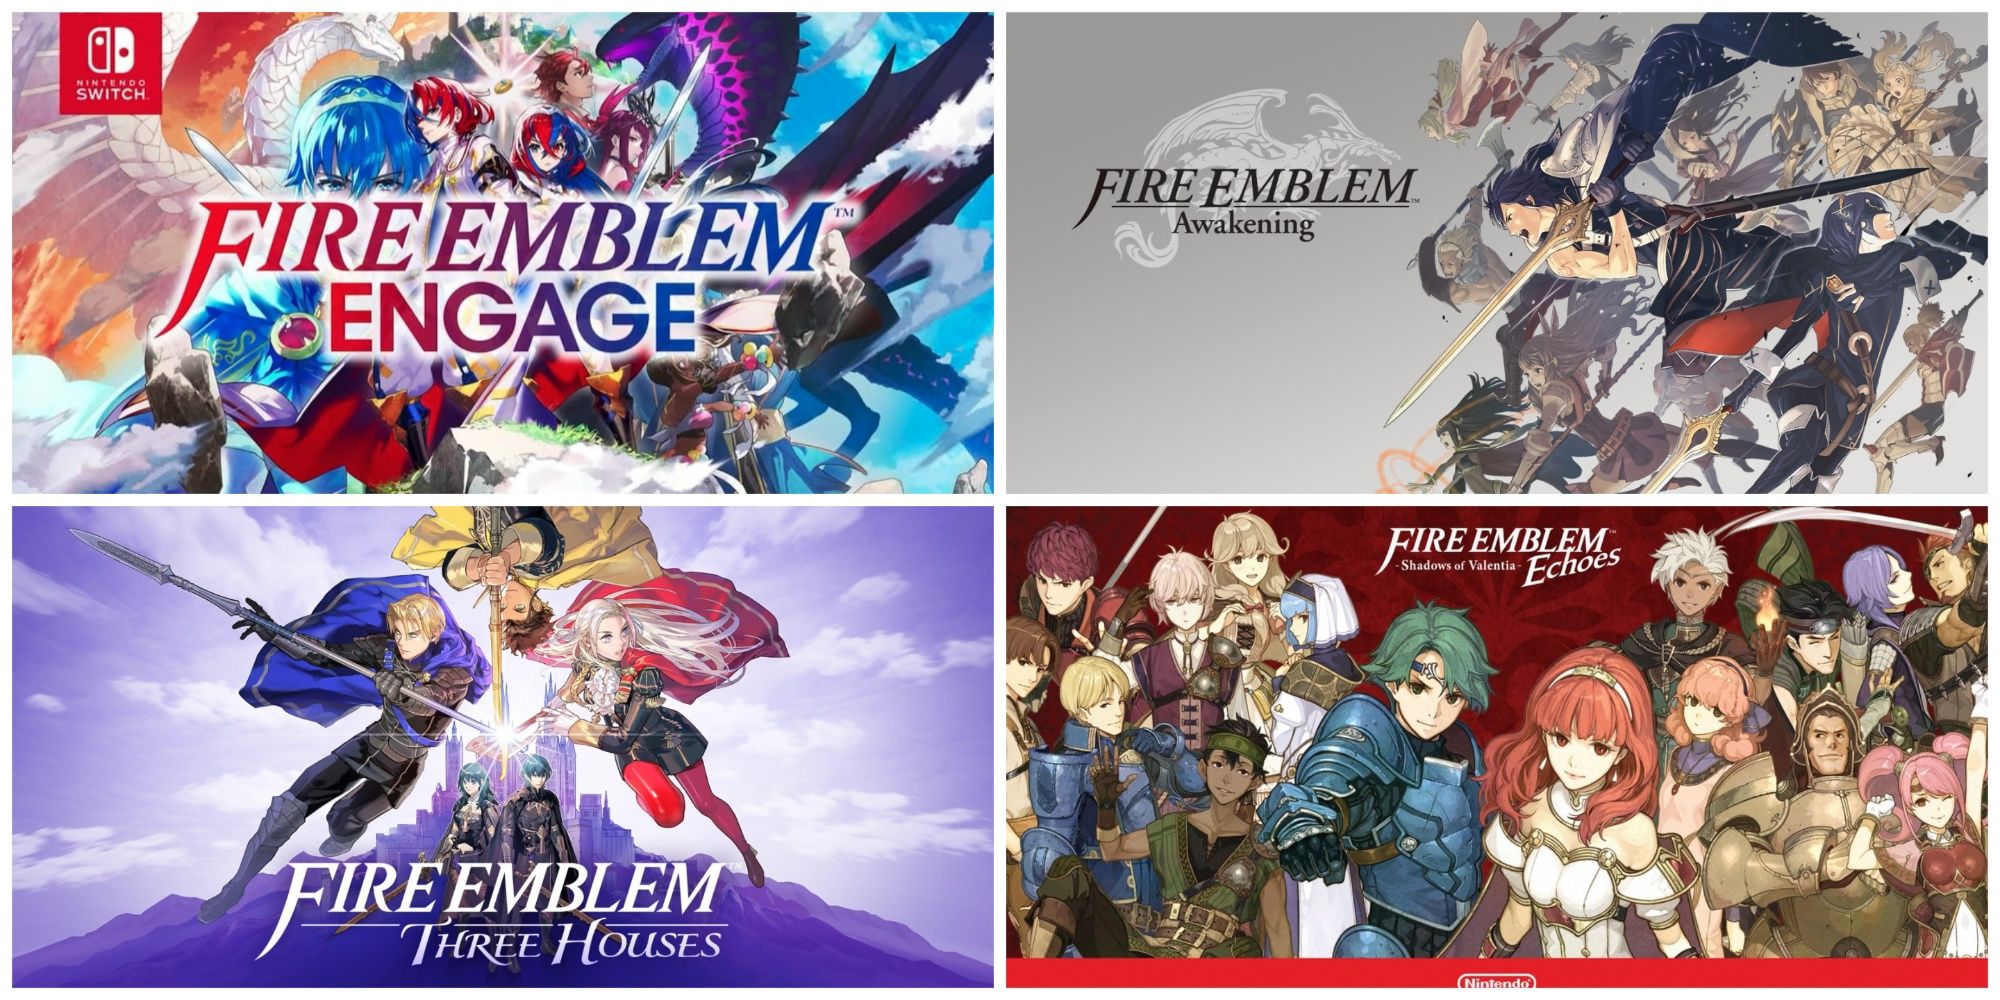 Collage of Four Fire Emblem Games: Engage, Awakening, Three Houses, and Echoes: Shadows of Valentia